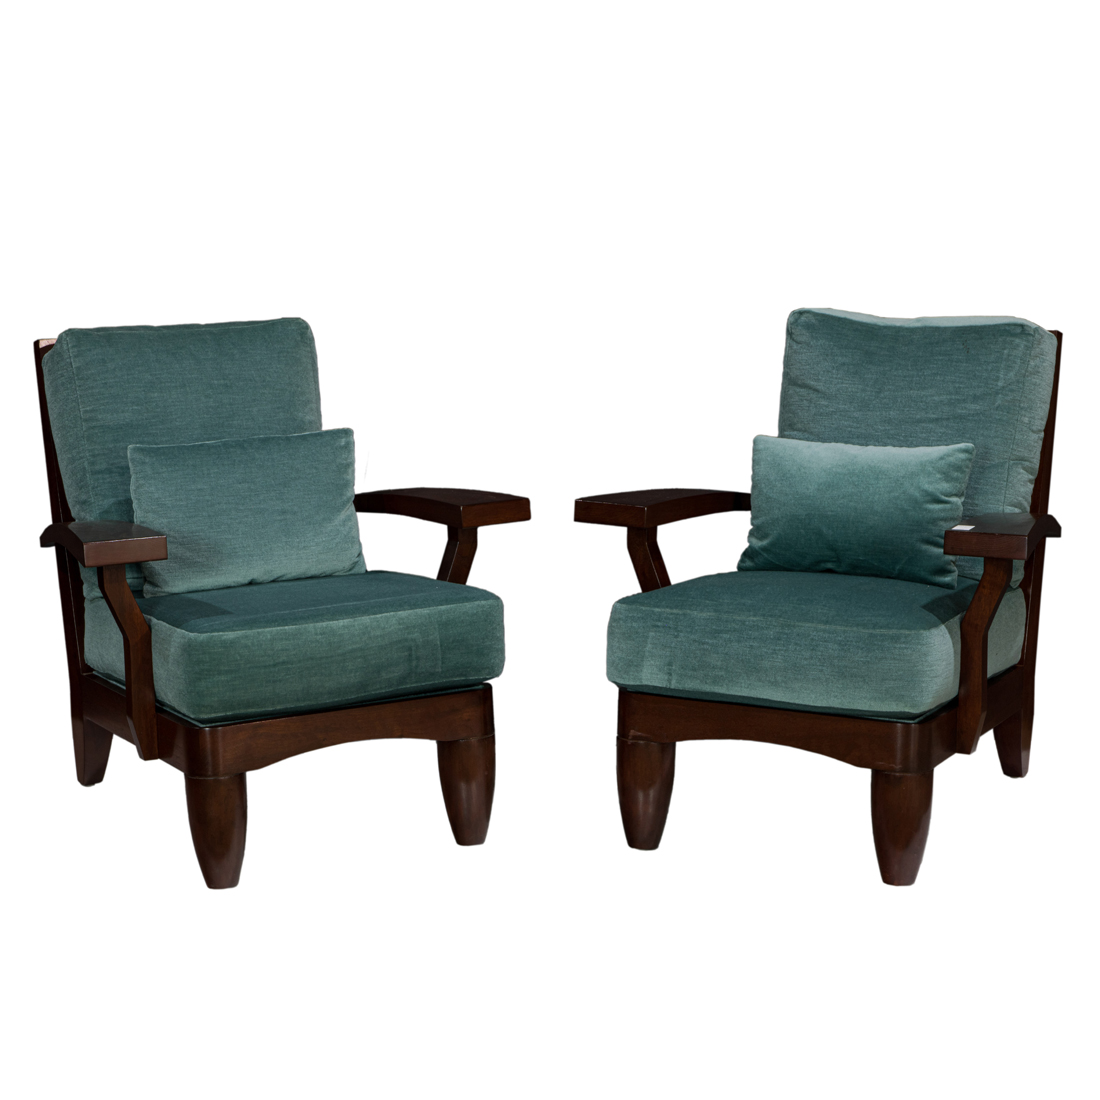 A PAIR OF CONTEMPORARY LOUNGE CHAIRS